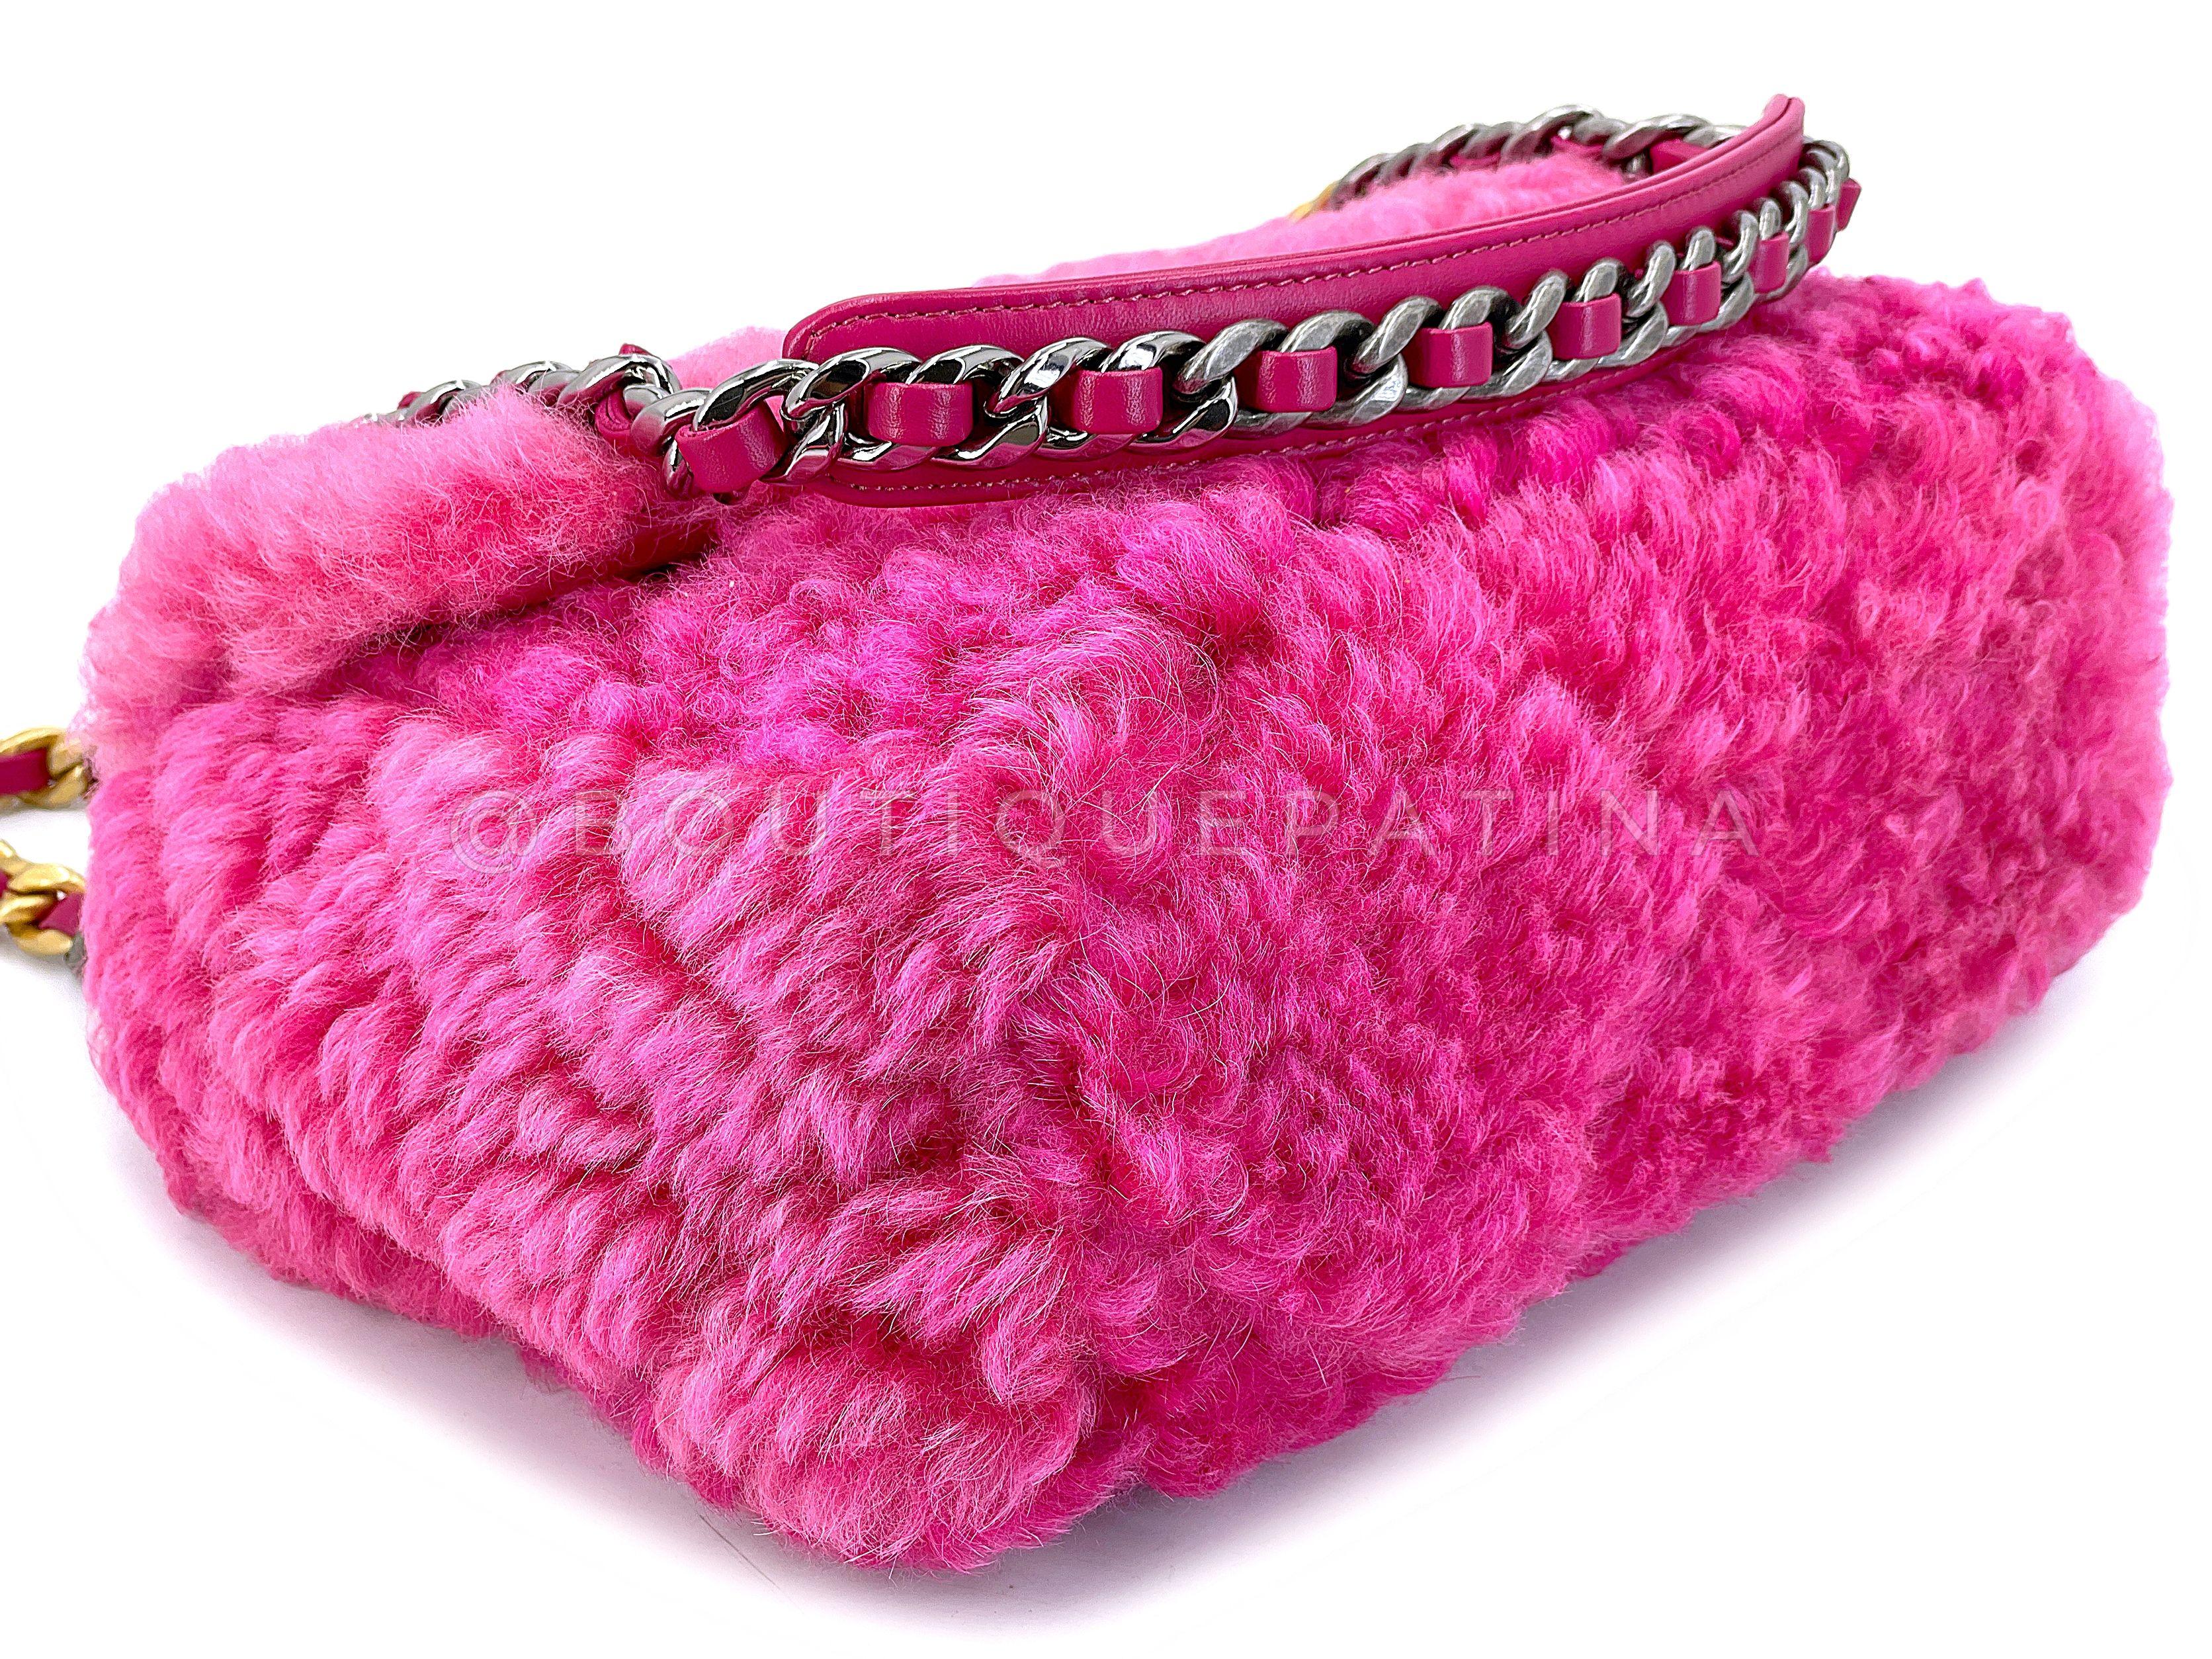 Chanel 19 Pink Shearling Fur Small Medium Flap Bag 67786 For Sale 2